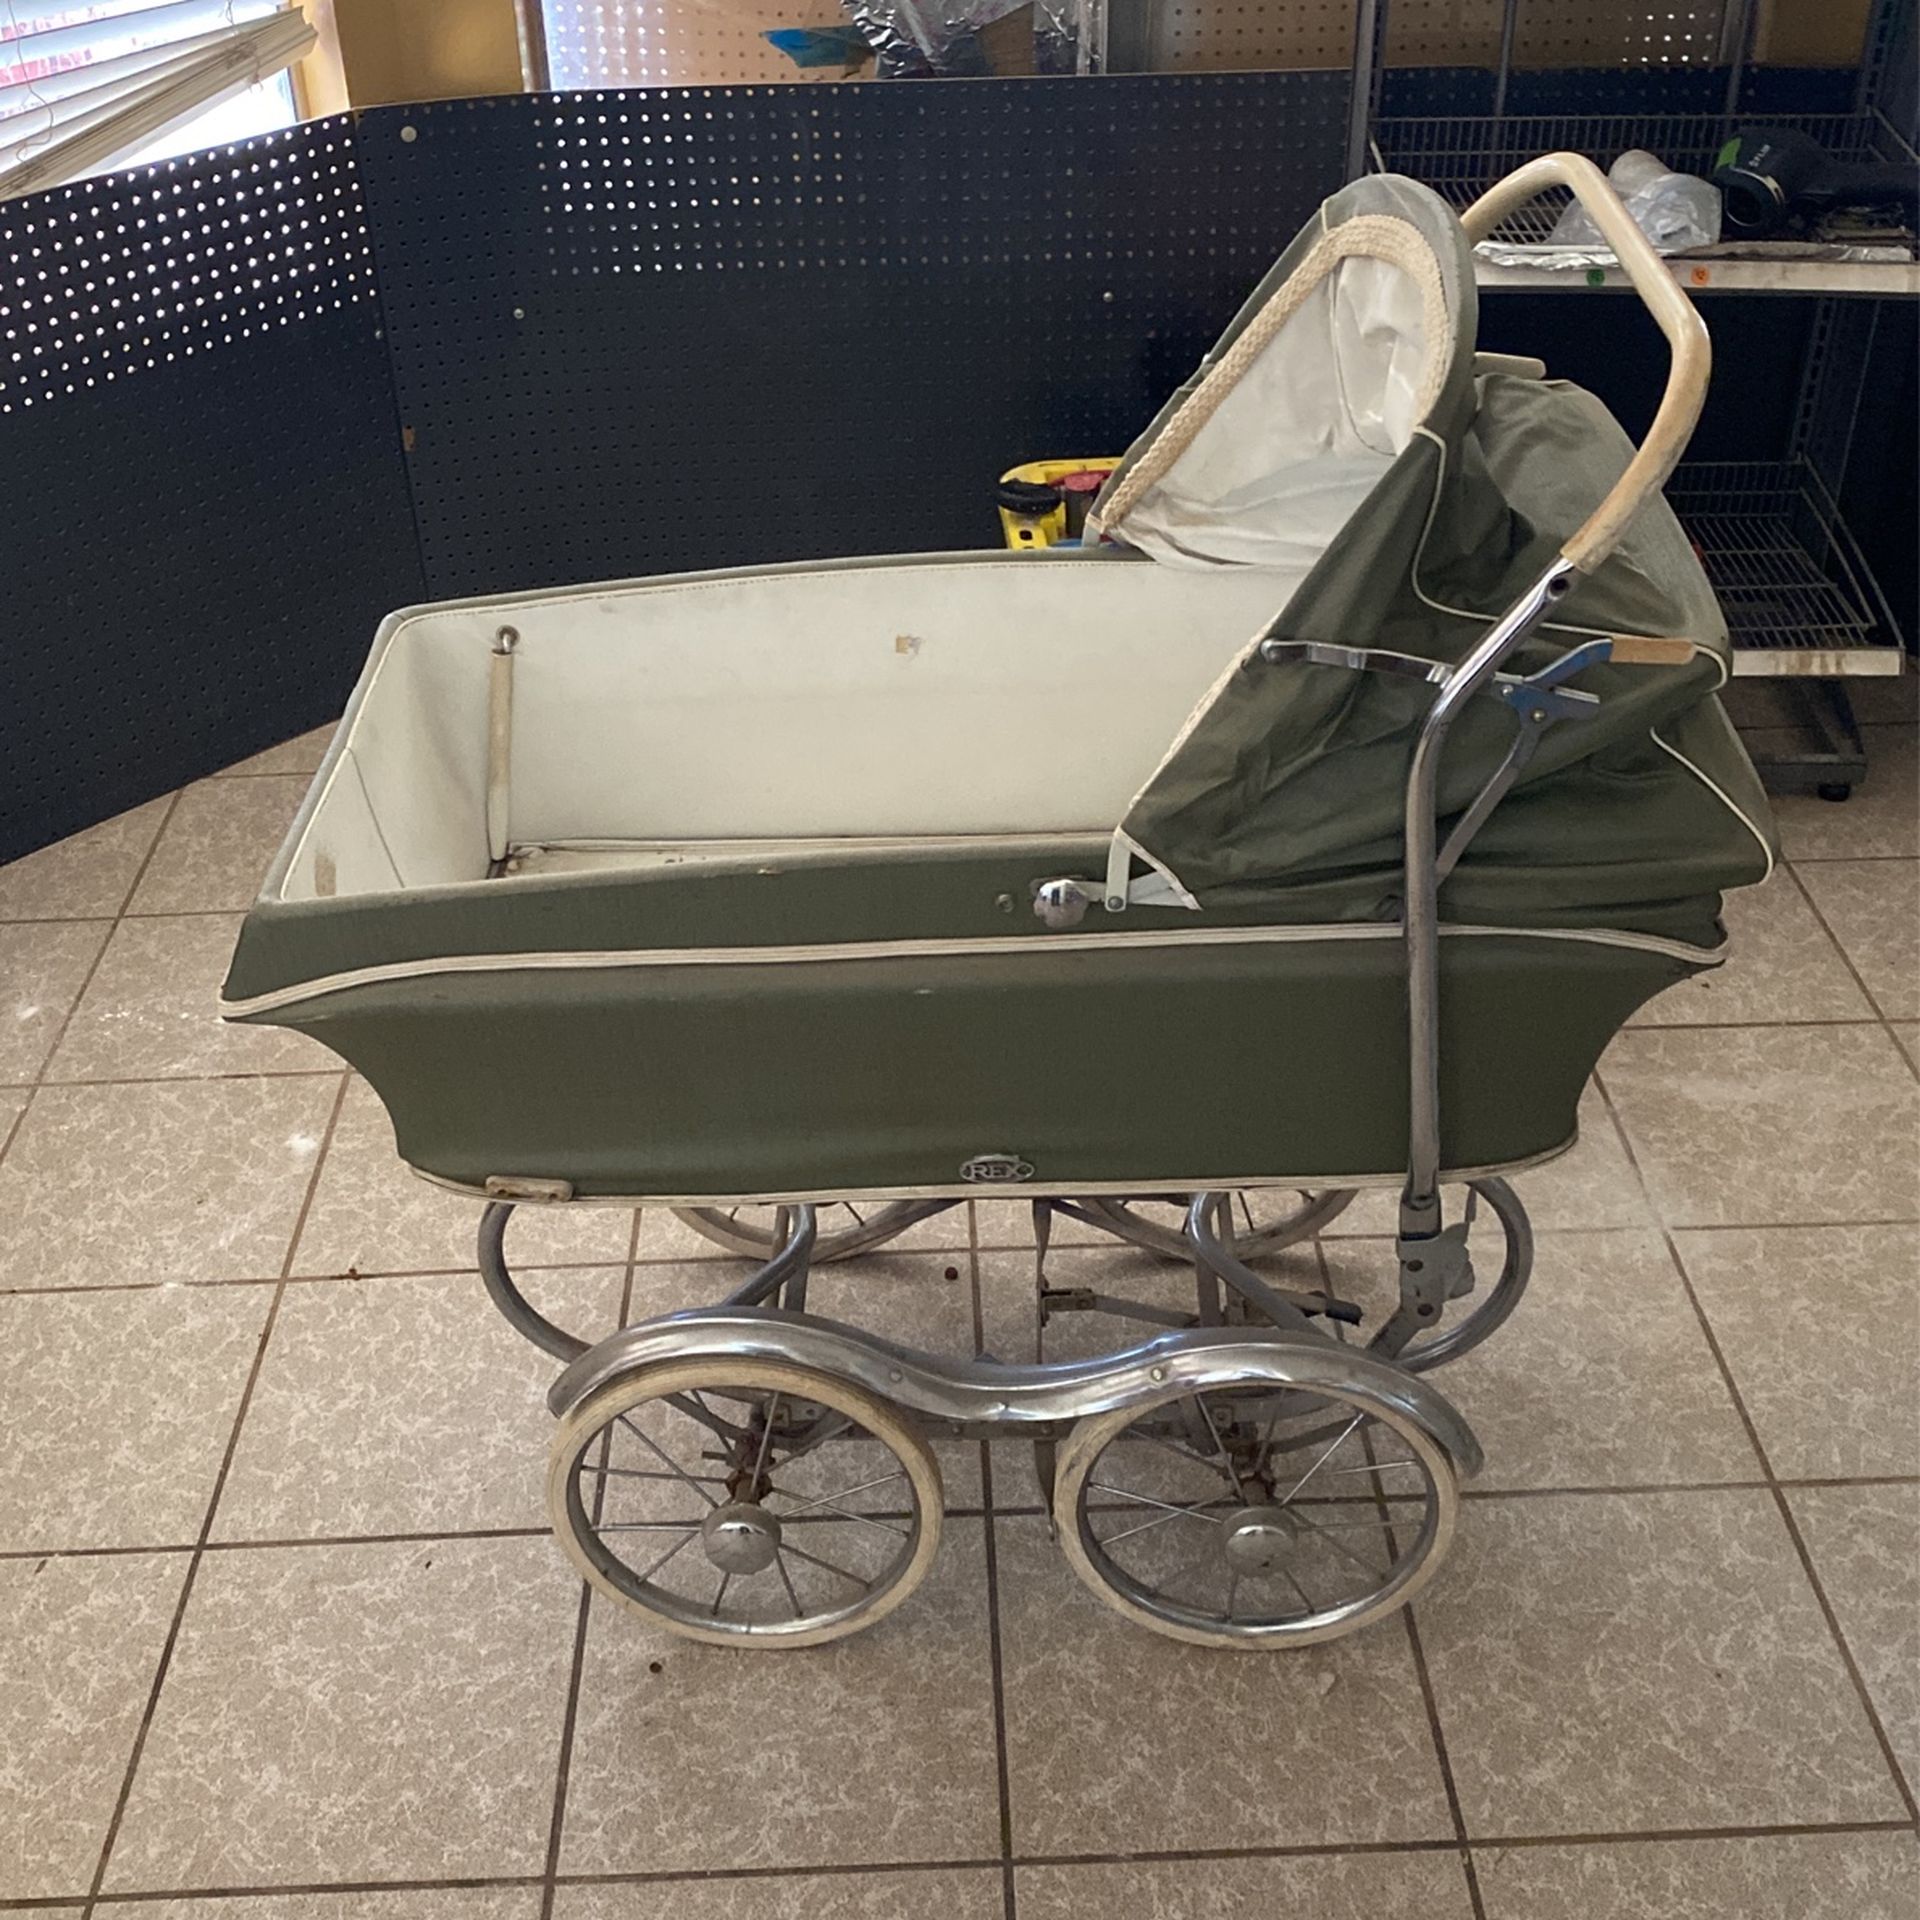 Rex Vintage Stroller from early 1900s